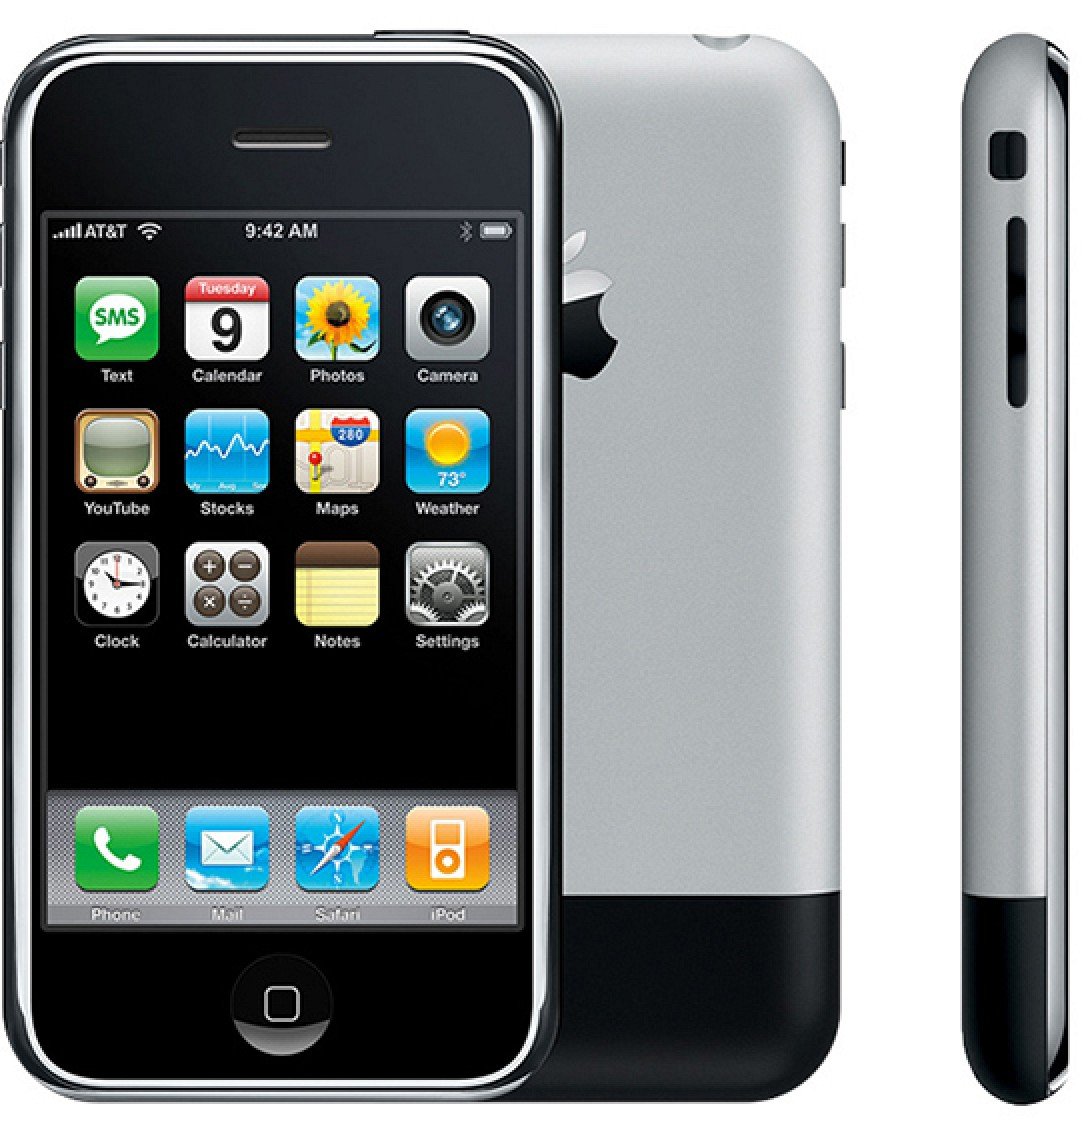 10 Years Ago Today, the Original iPhone Officially ...